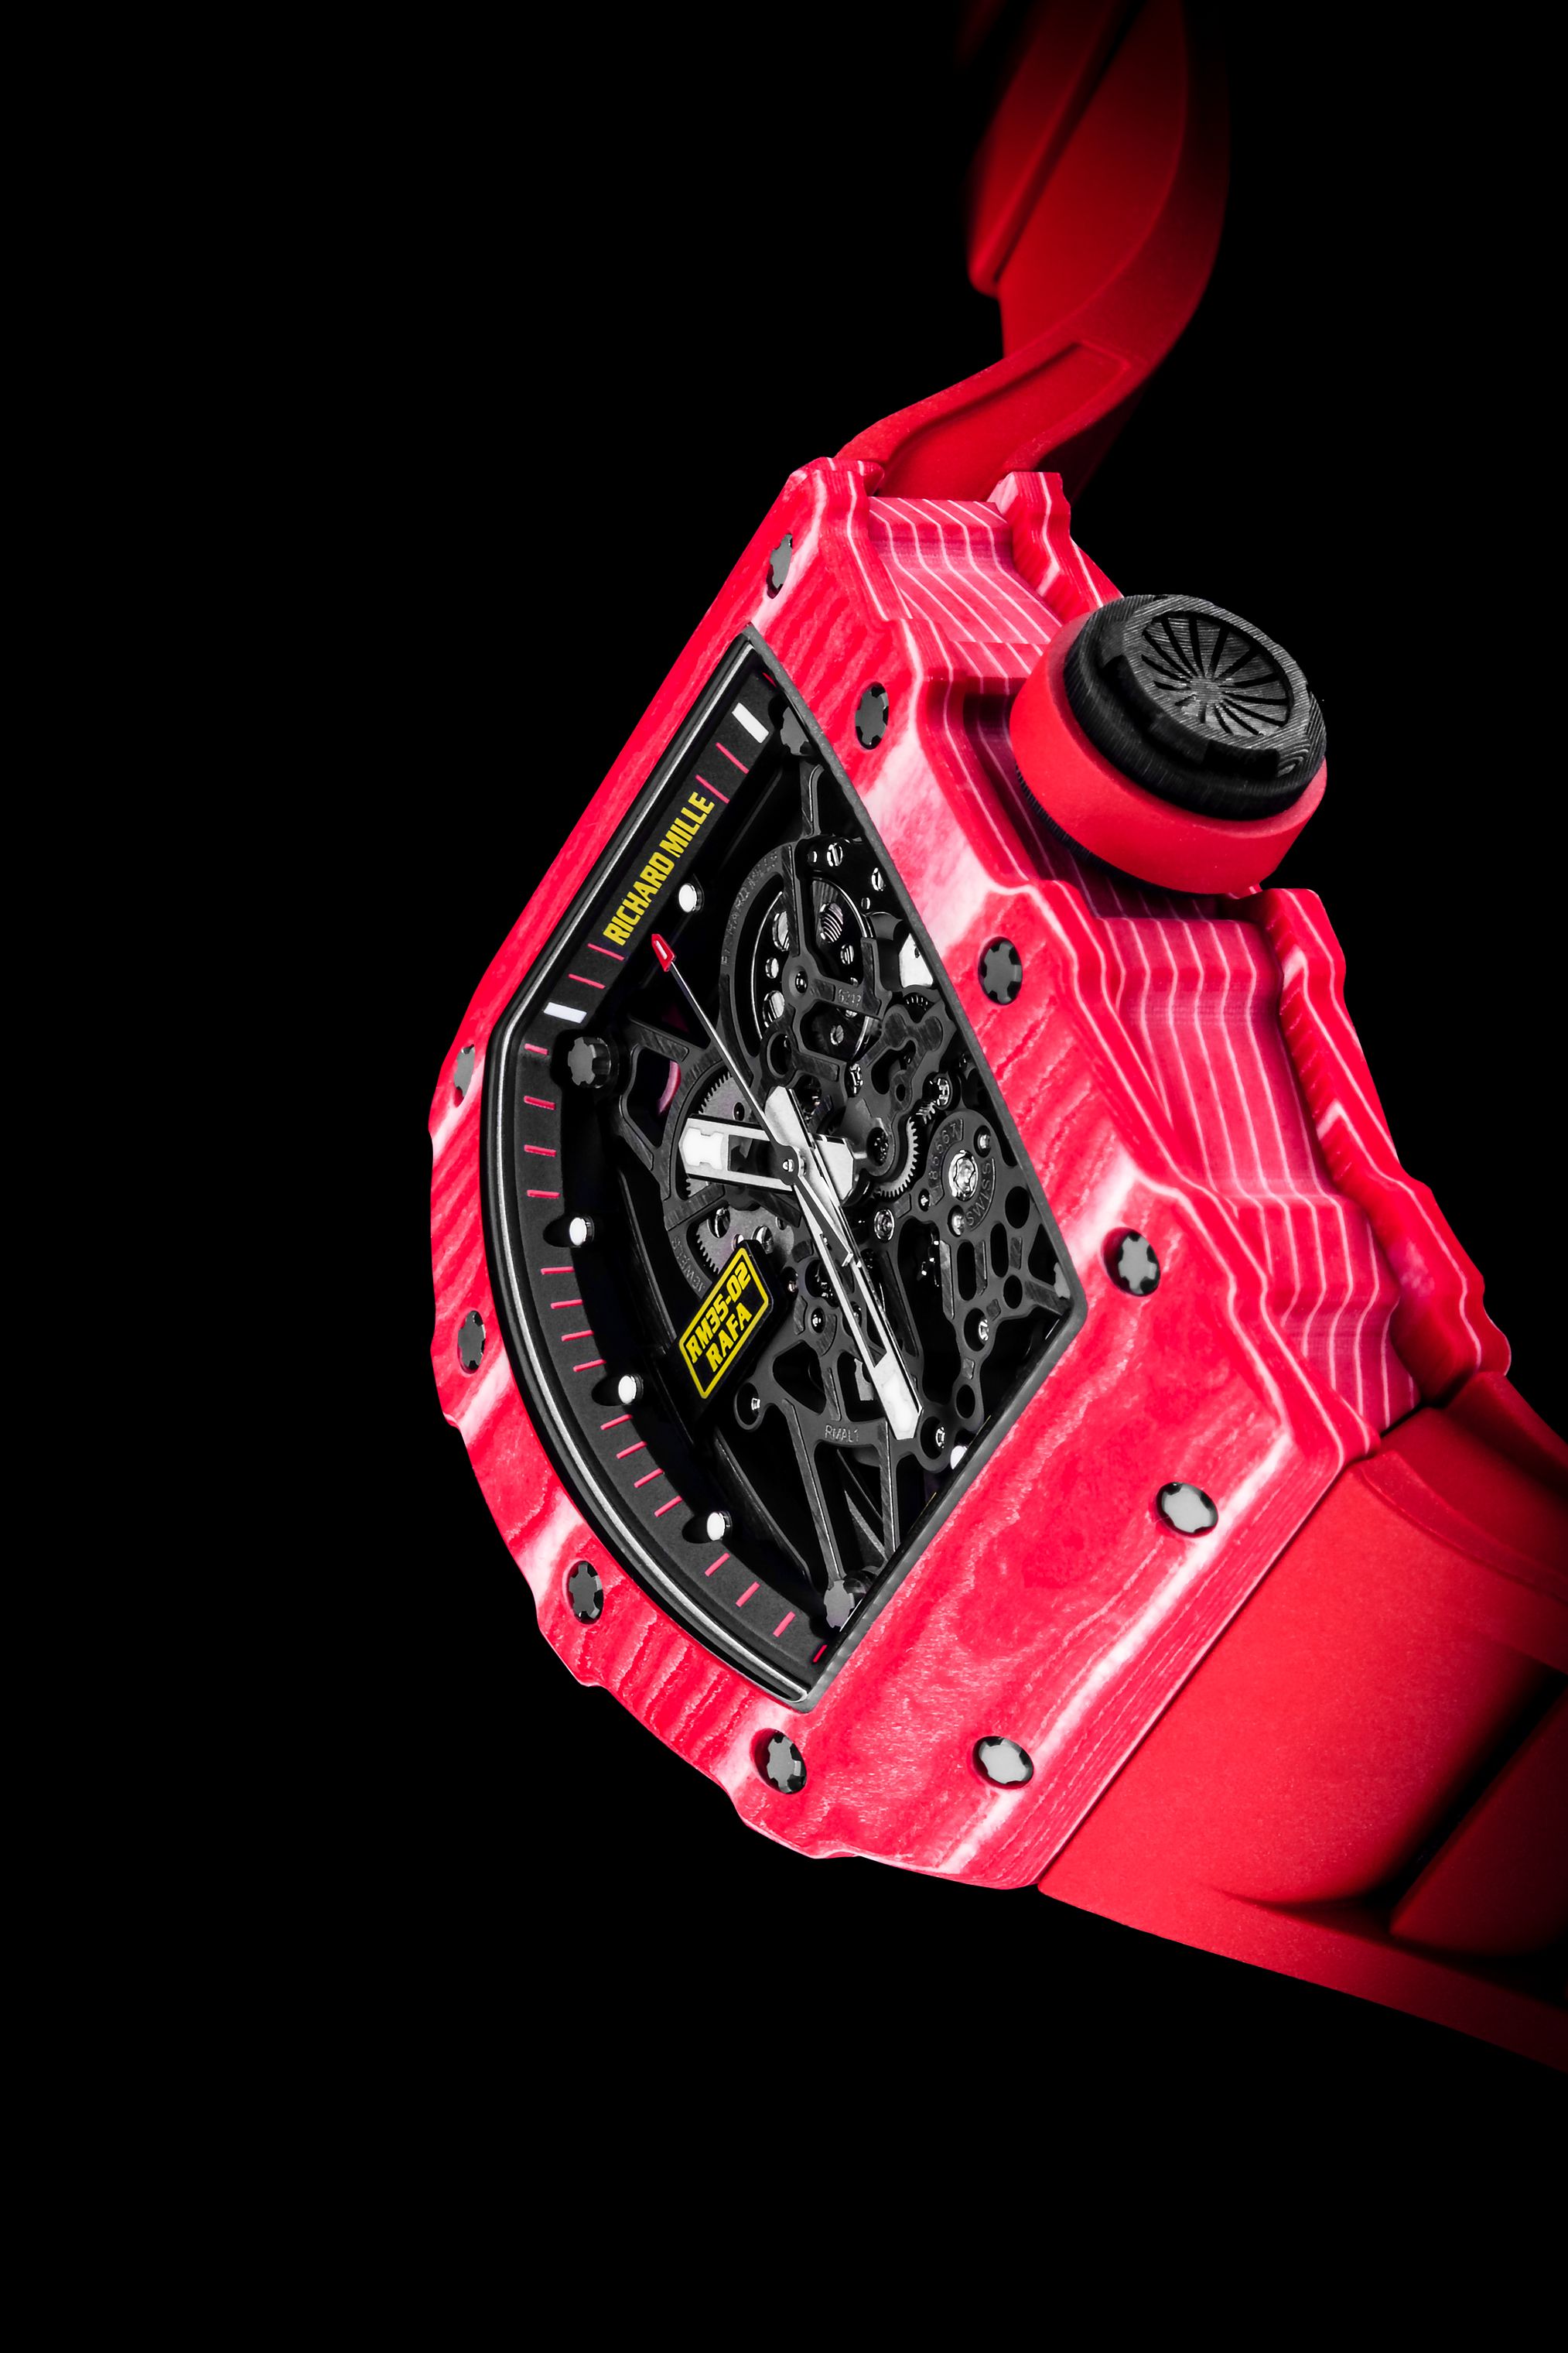 Richard Mille RM030 Titanium Automatic with Declutchable Rotor Watch